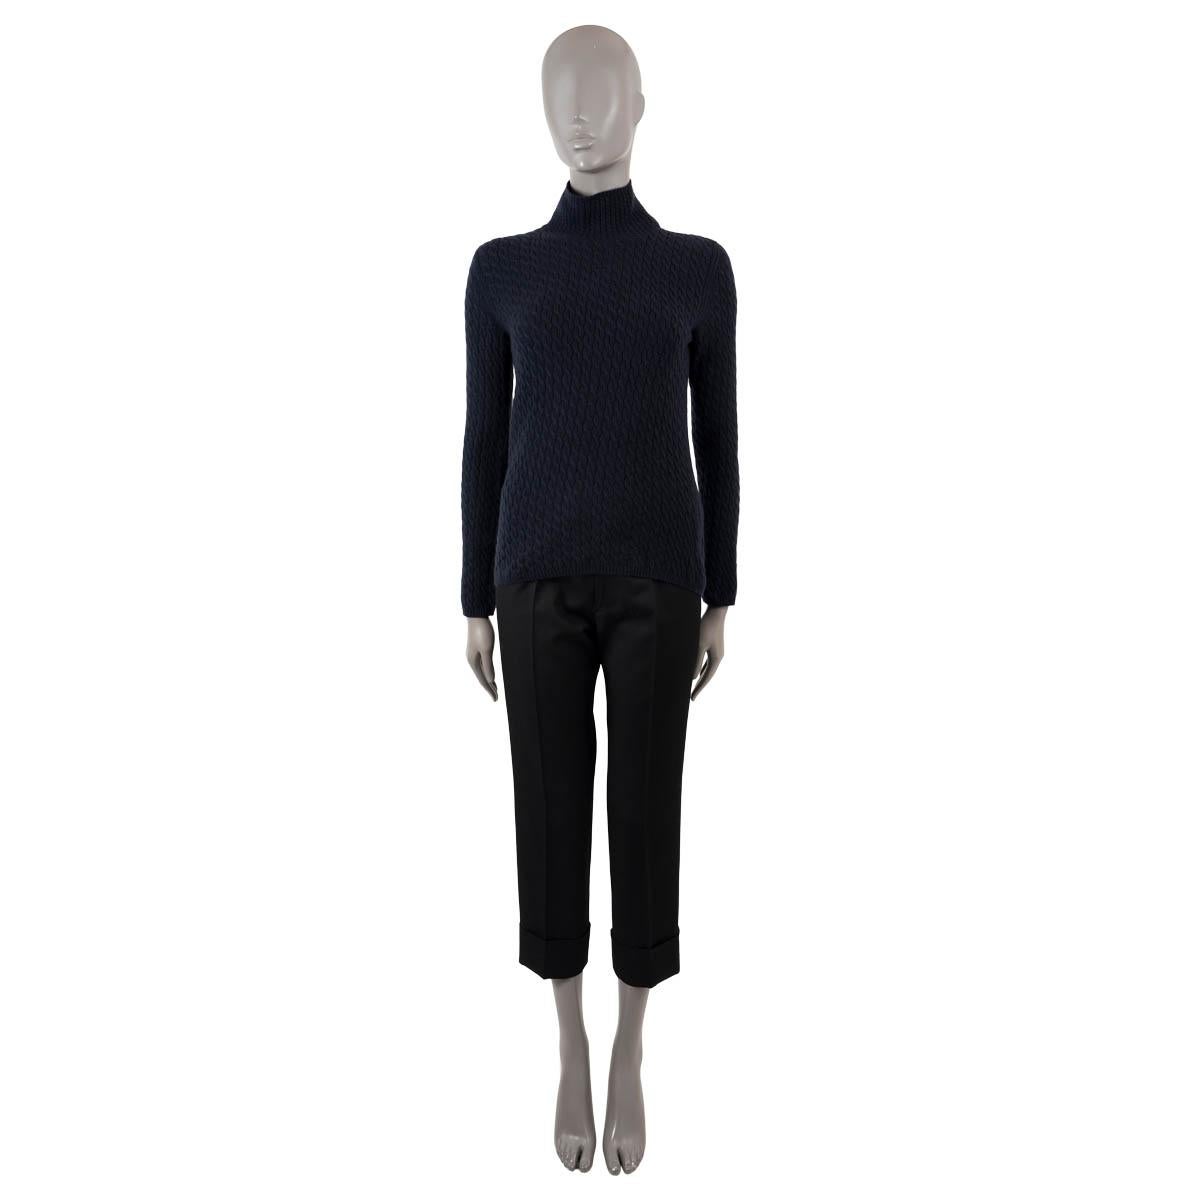 100% authentic Loro Piana cable knit sweater in navy blue cashmere (100%). Features a rib knit mock neck. Unlined. Has been worn and is in excellent condition.

Measurements
Tag Size	44 cut small
Size	S/M
Shoulder Width	35cm (13.7in)
Bust From	92cm